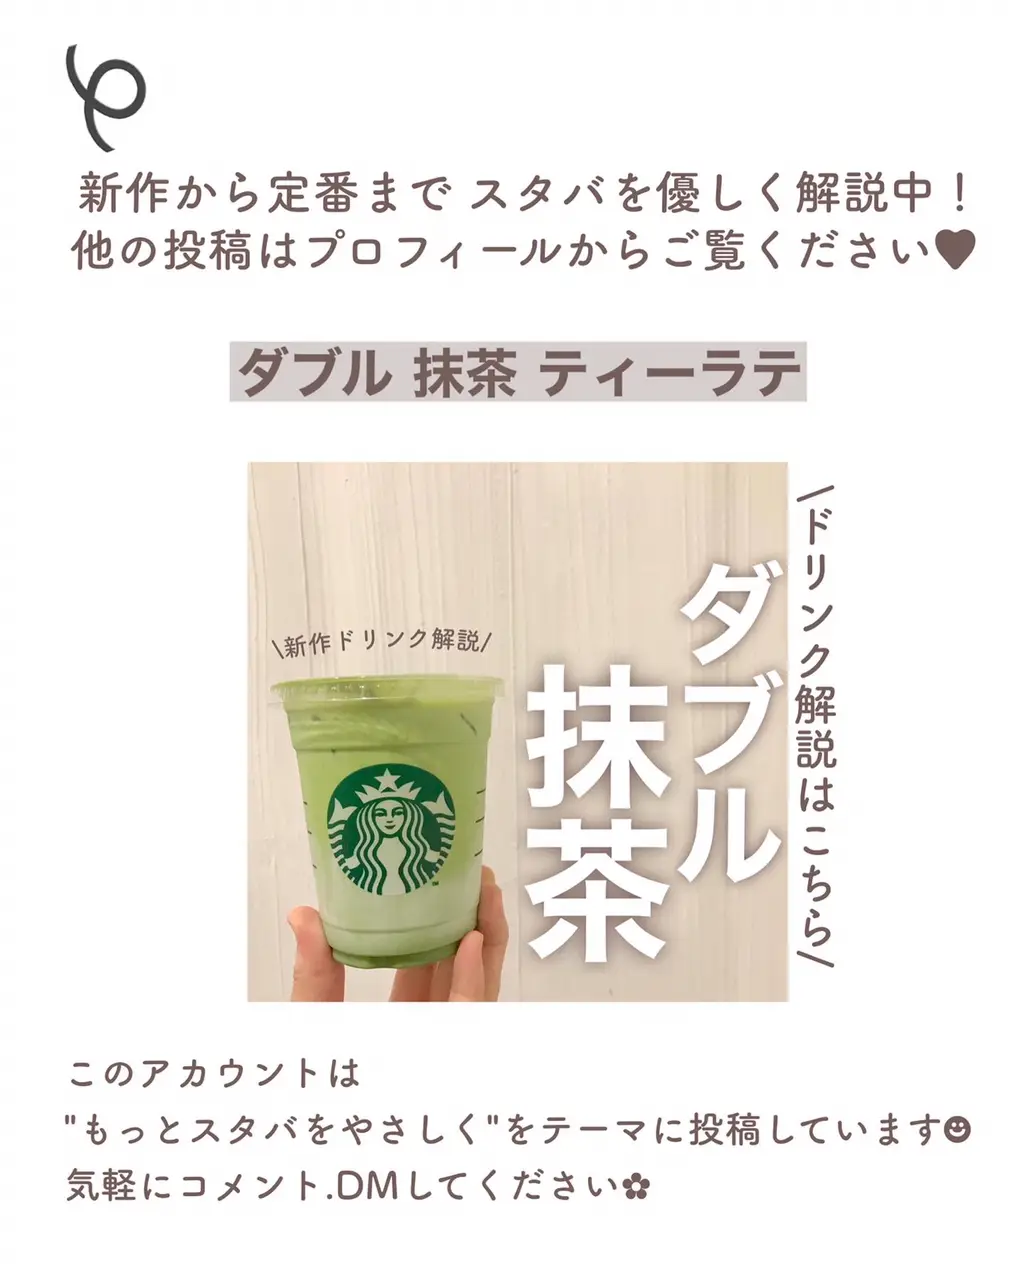 Double Matcha Tea Latte Customized 5 】 | Gallery posted by